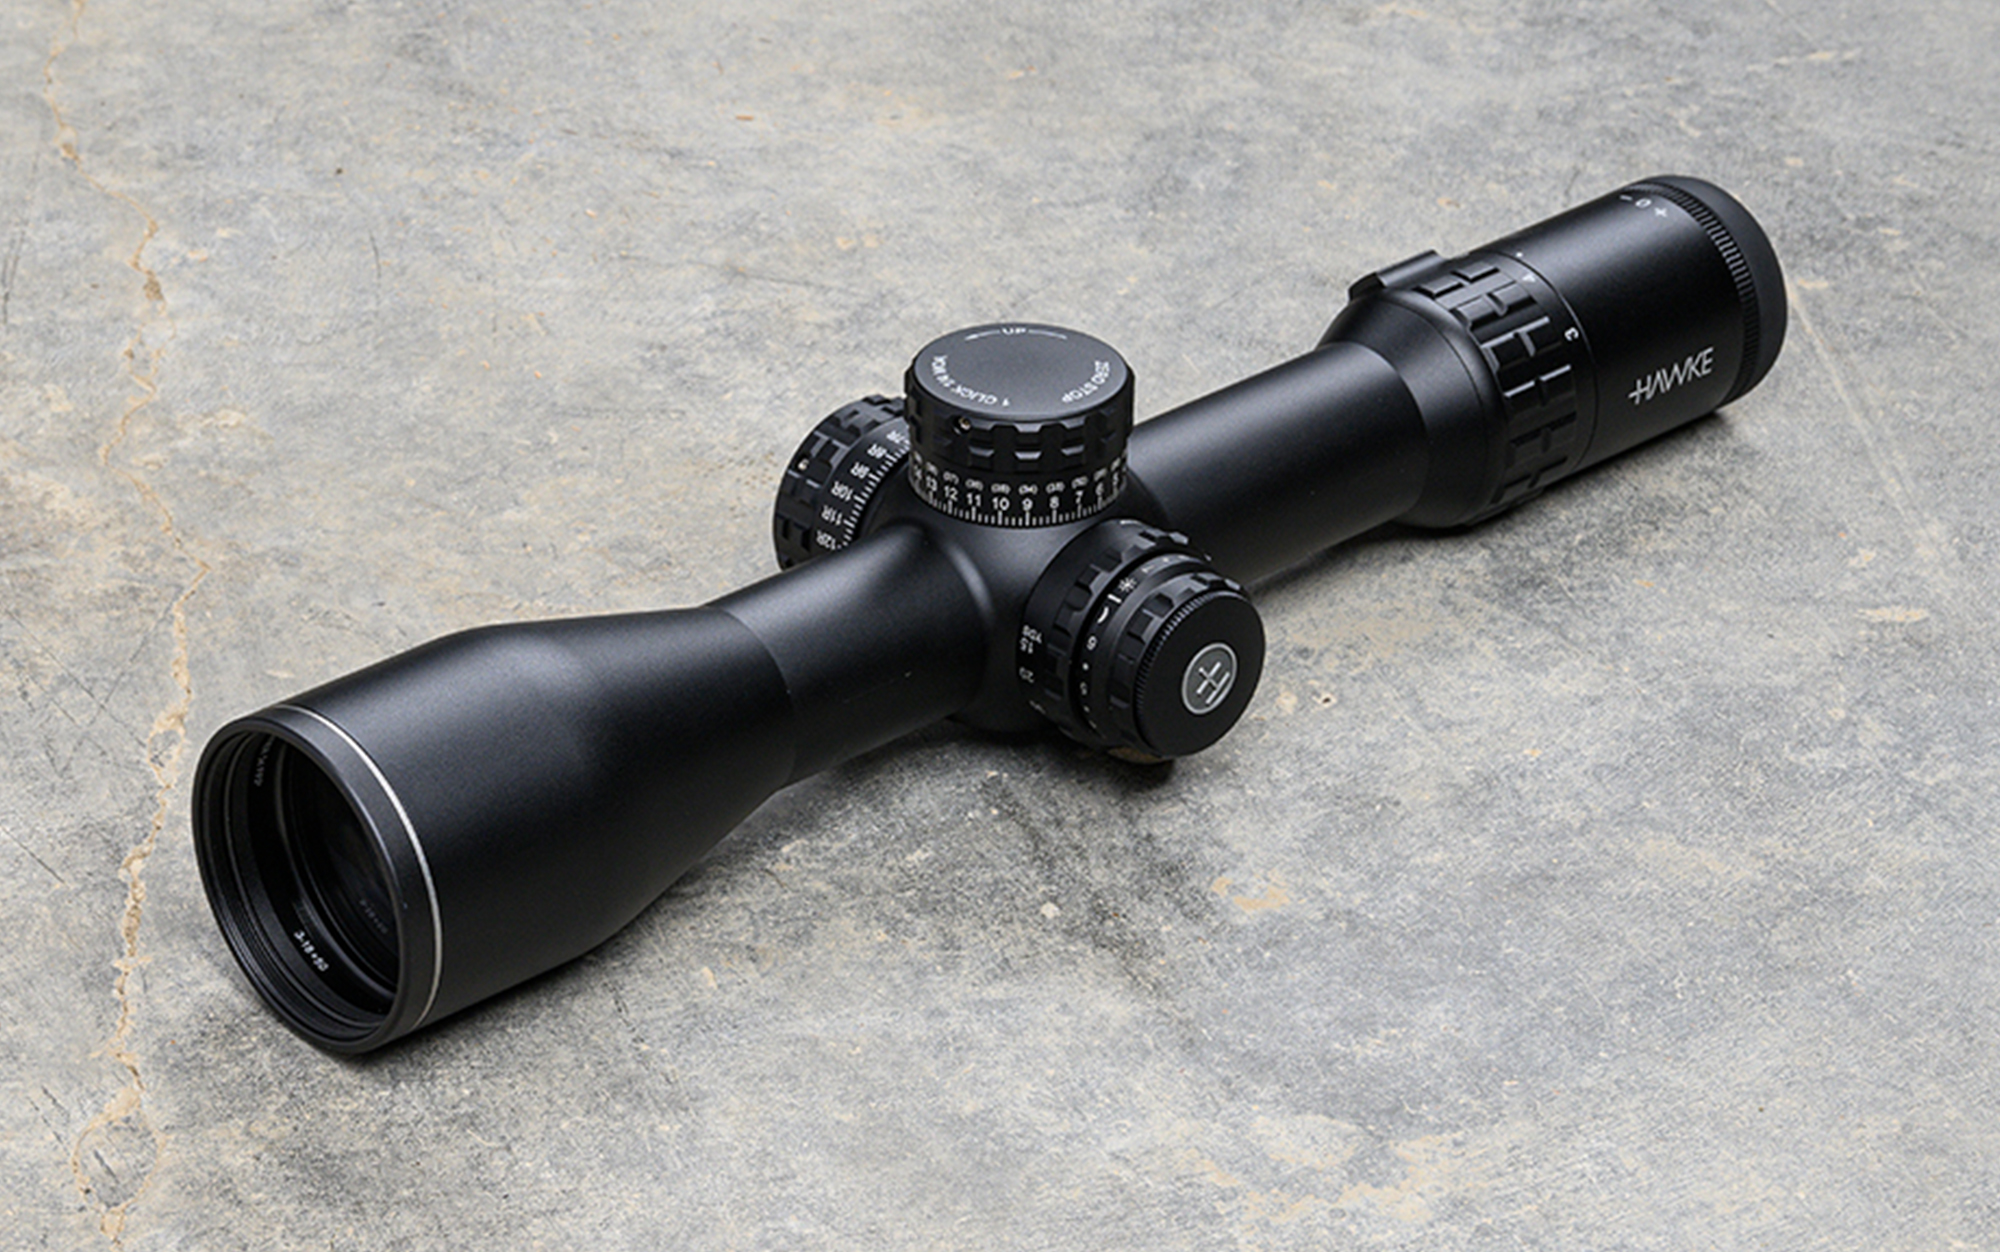 The Hawke Frontier 34 FFP 3-18x50 is the best lightweight precision rifle scope.